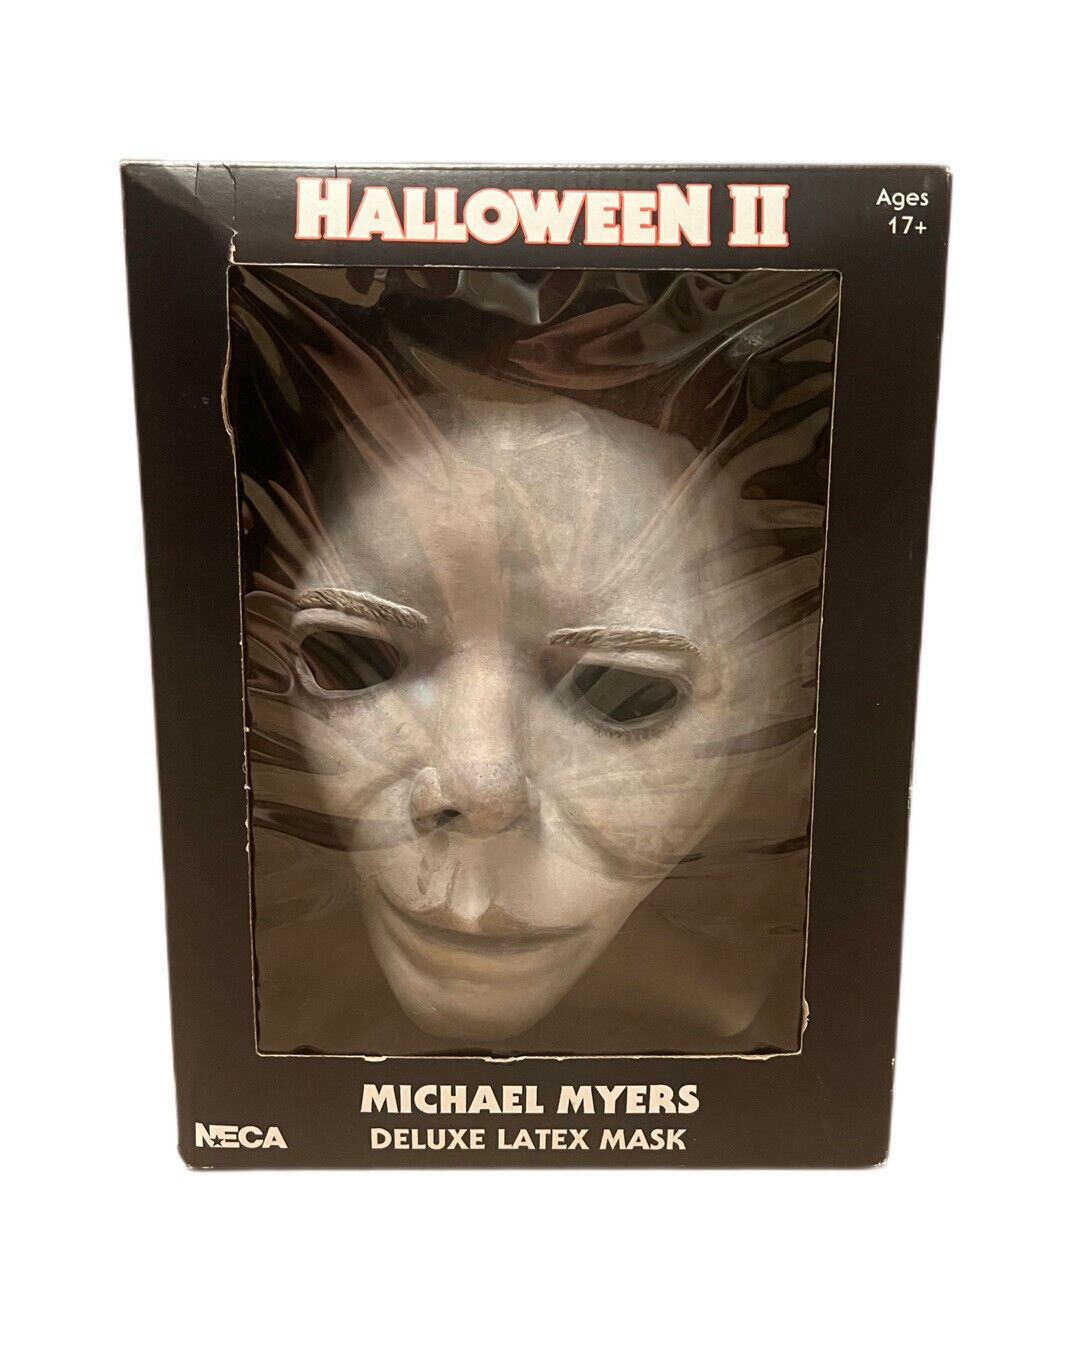 Halloween 2 Michael Myers Mask Limited Edition NECA Walmart Exclusive - NEW